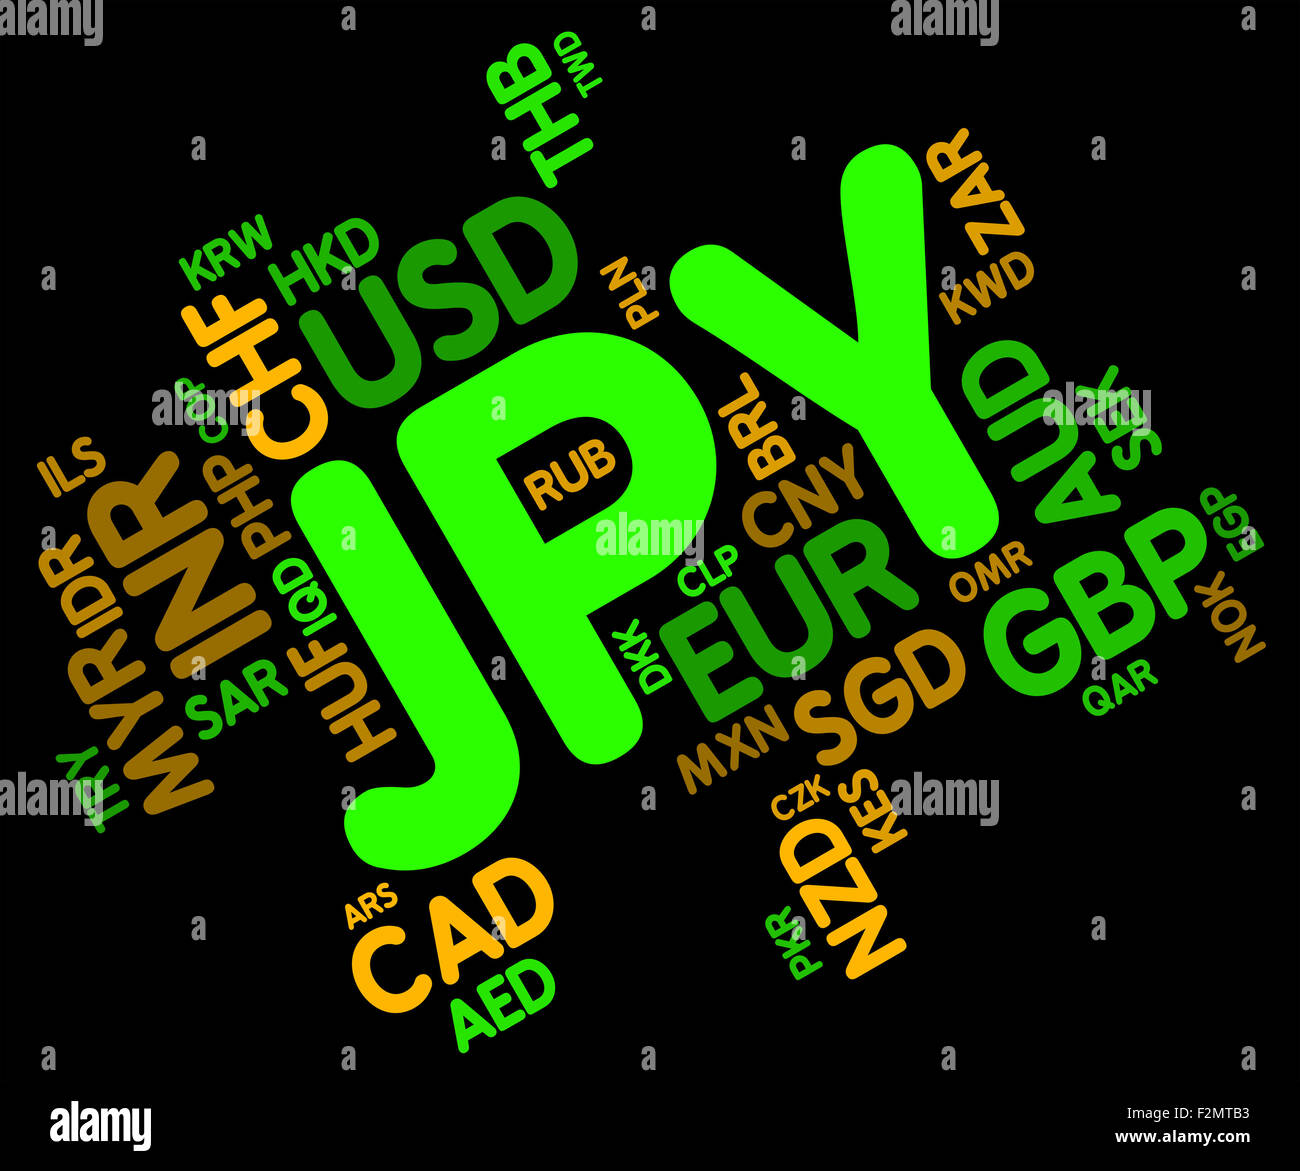 Jpy Currency Meaning Exchange Rate And Wordcloud Stock Photo